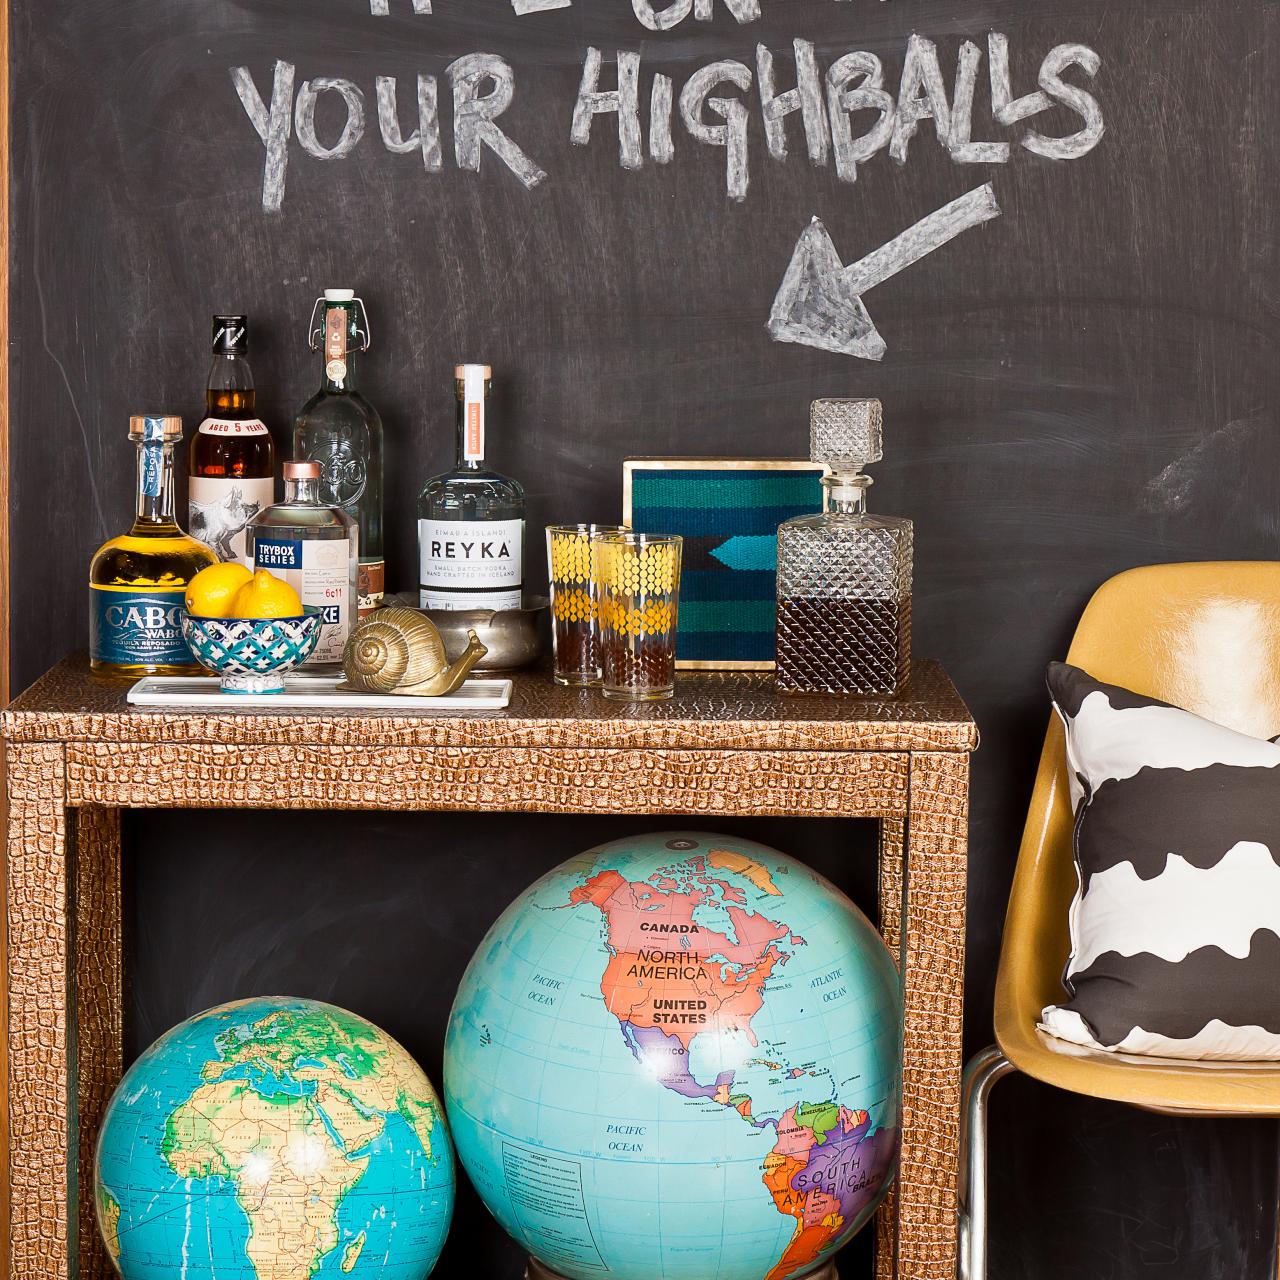 Chalkboard decorating ideas for Christmas - Chickabug